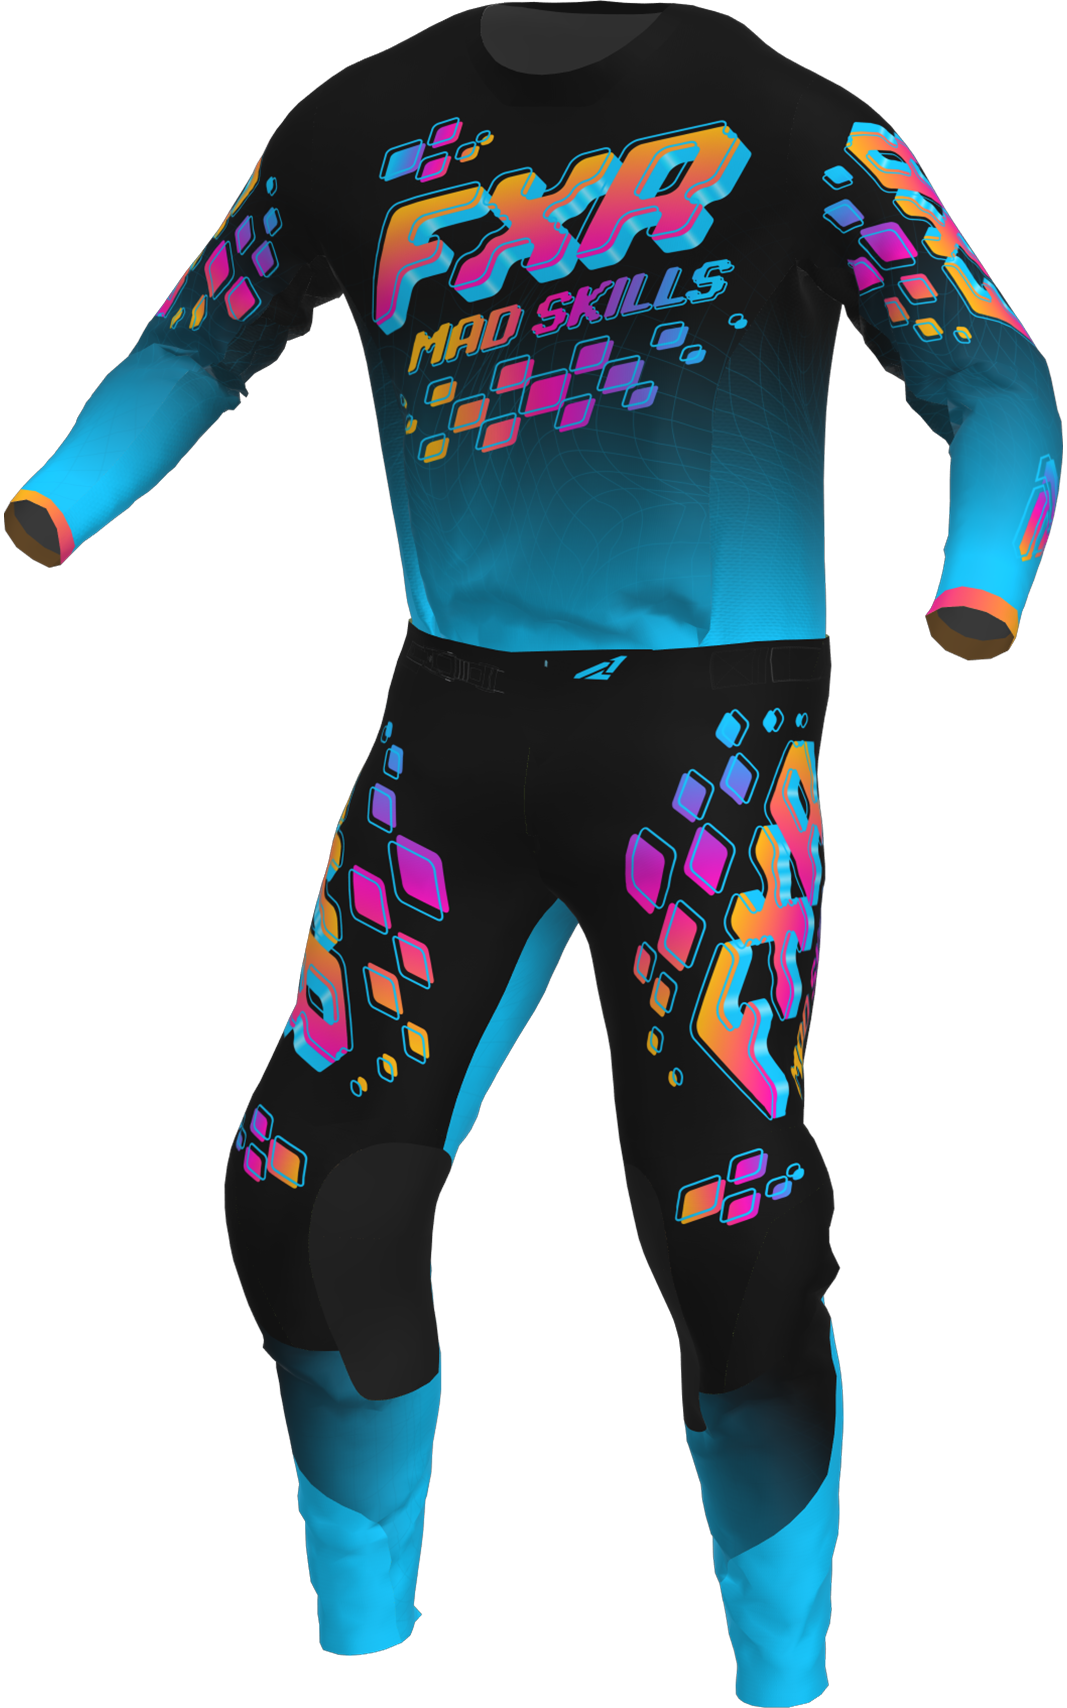 A 3D image of FXR's Podium MX Jersey and Pant in Mad Skills colorway